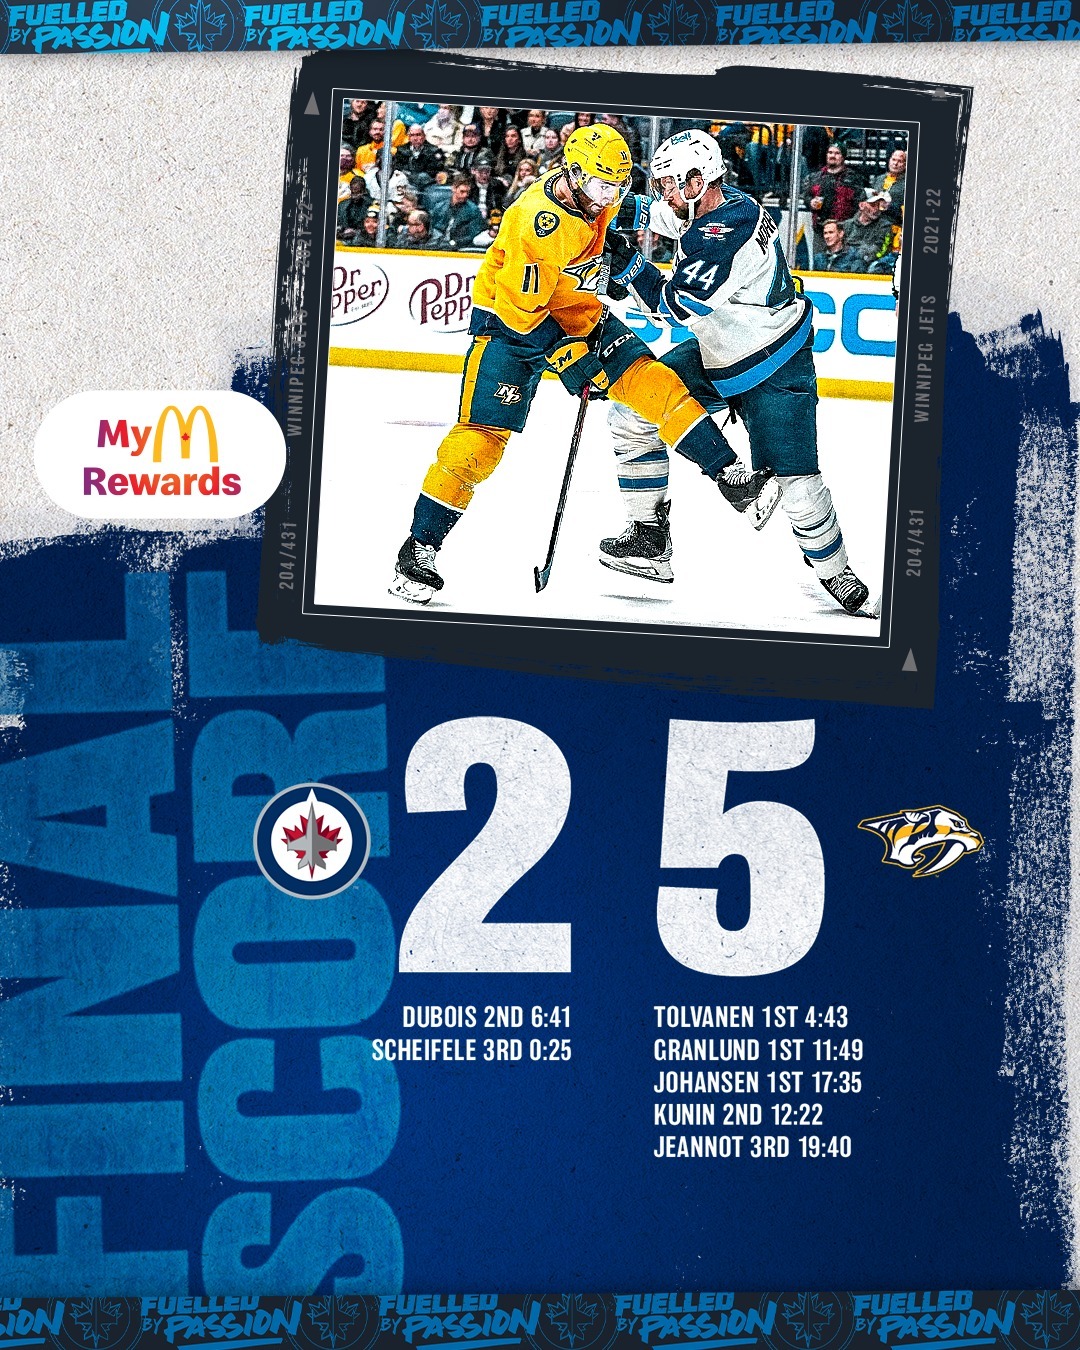 #NHLJets outshoot the Preds by a margin of 38-23, but fall short tonight  : Dubo...